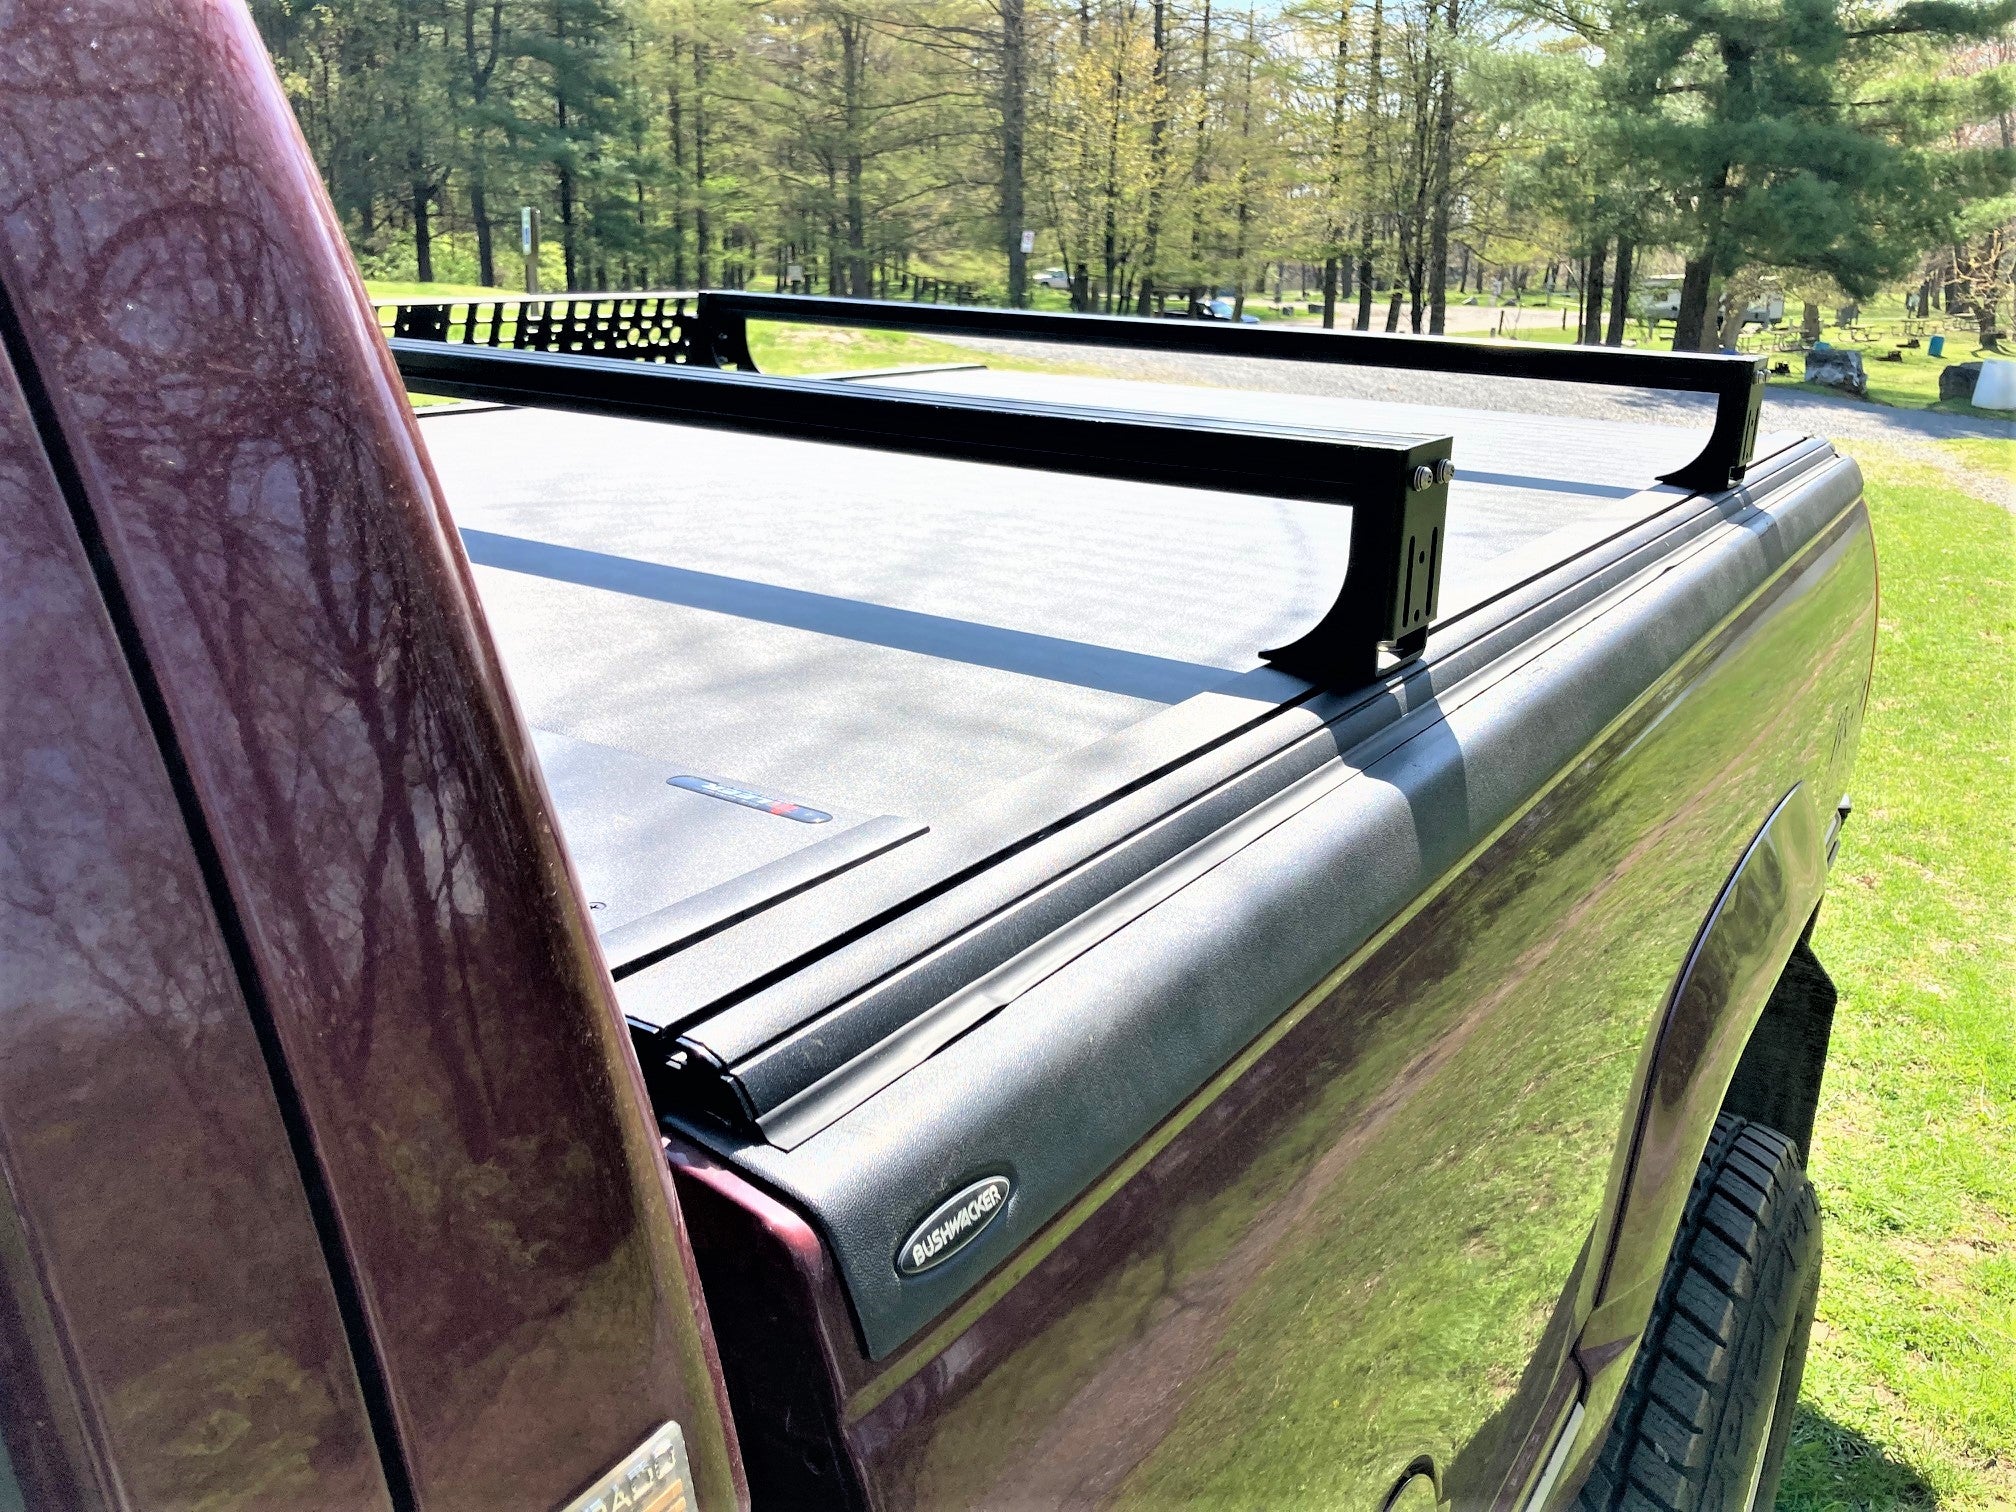 RAM 1500, 2500, 3500 - Bed Rack For Retractable Covers with T-slots